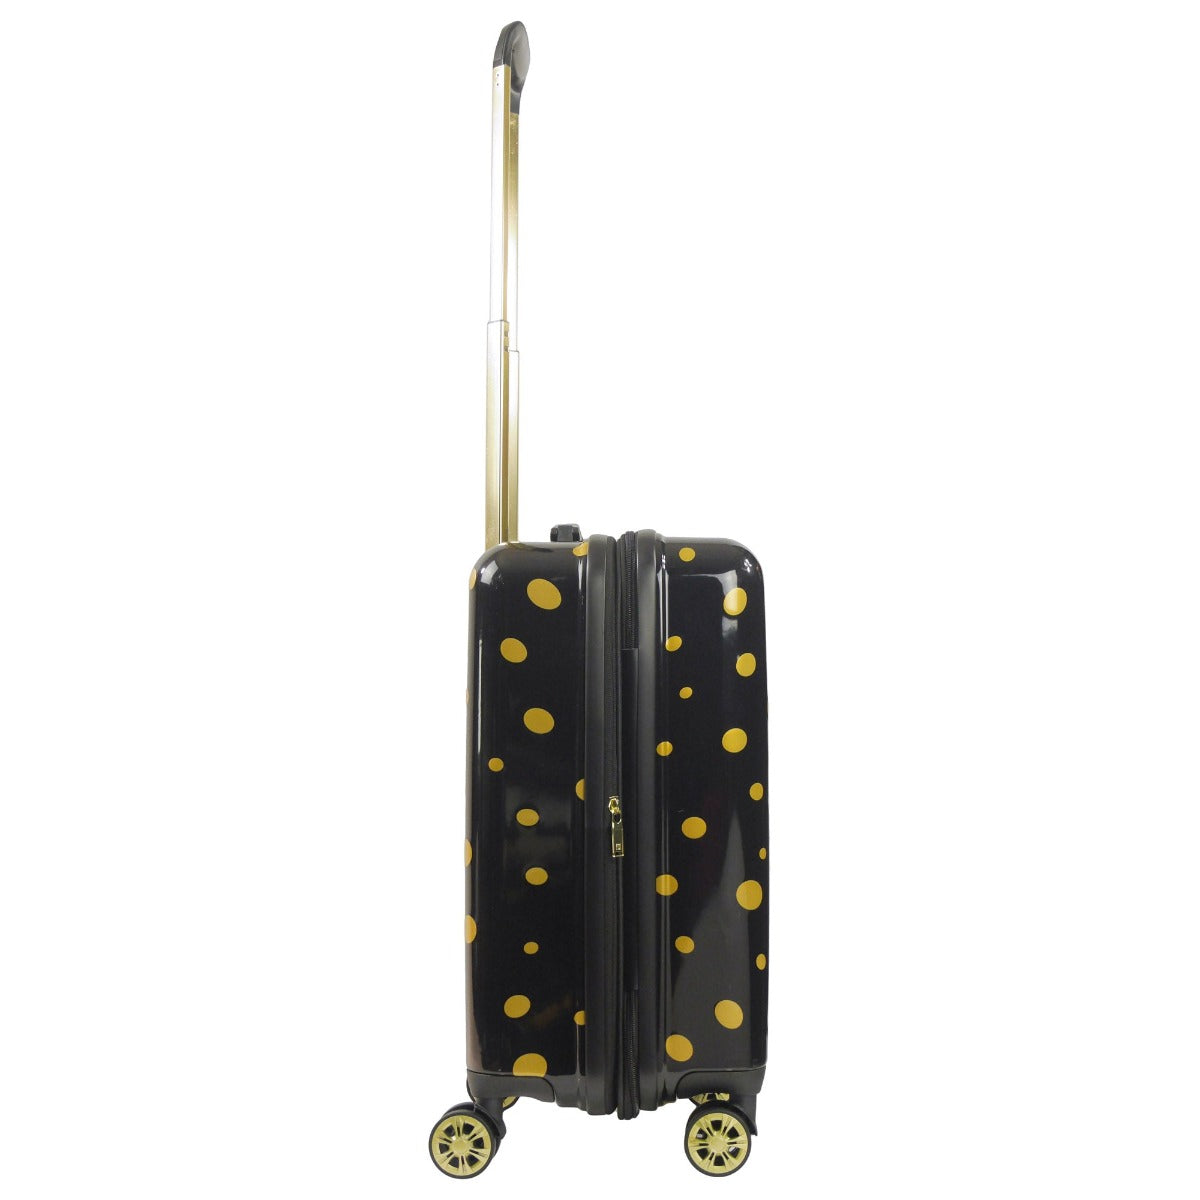 Ful Impulse Mixed Dots Hardside Spinner 22 inch Luggage carry-on black gold suitcase